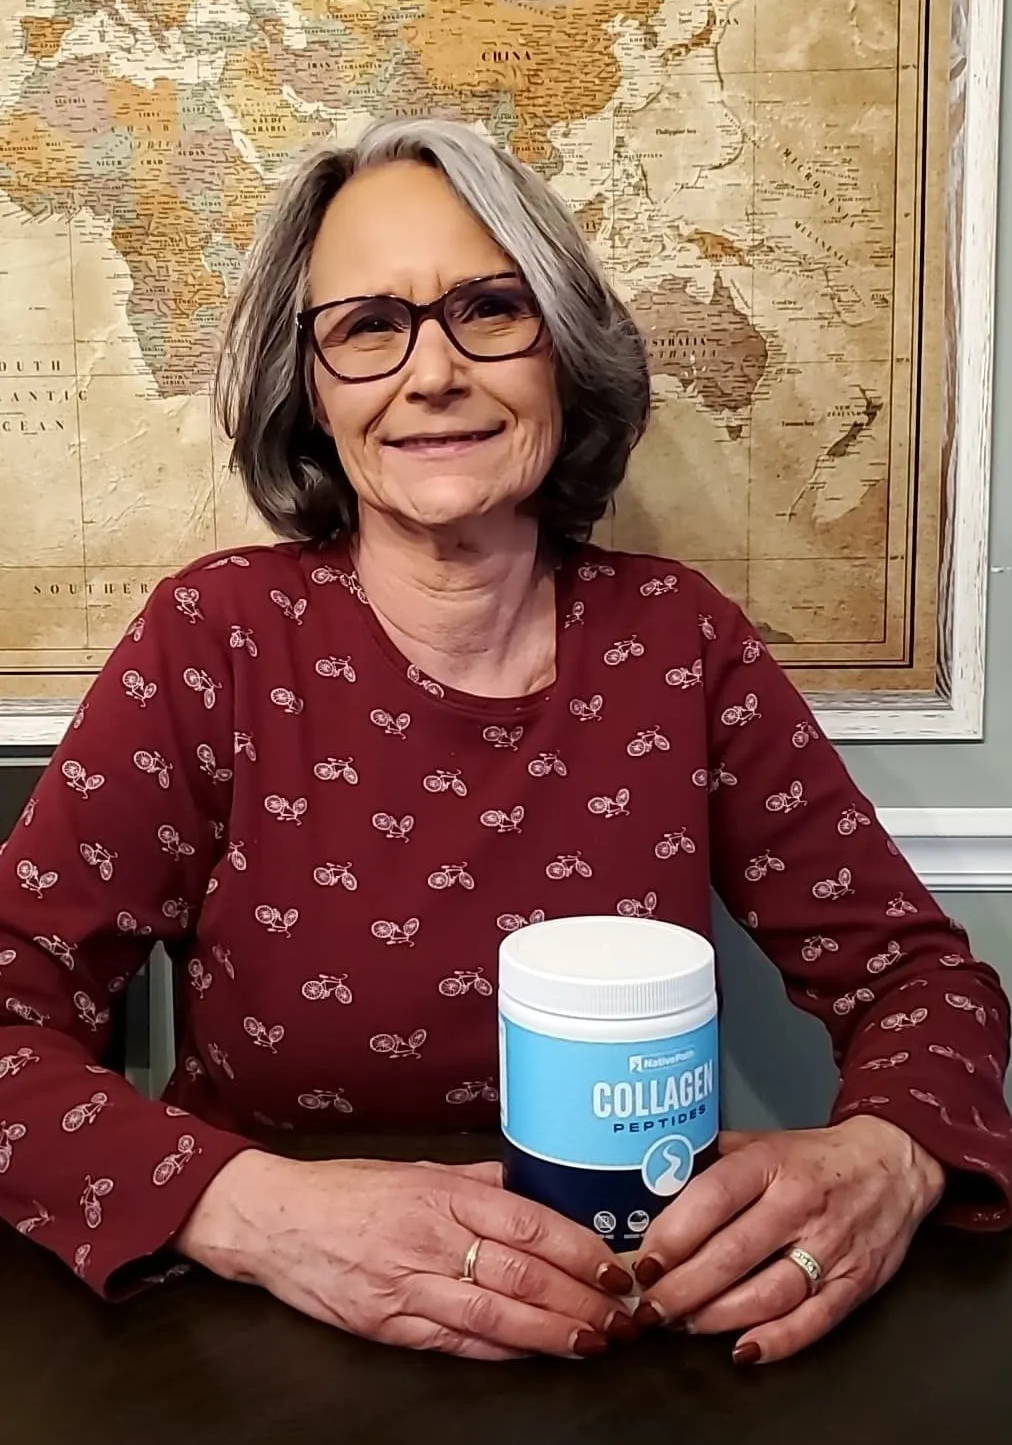 NativePath female customer with gray hair and glasses holding a jar of NativePath Collagen and smiling into camera